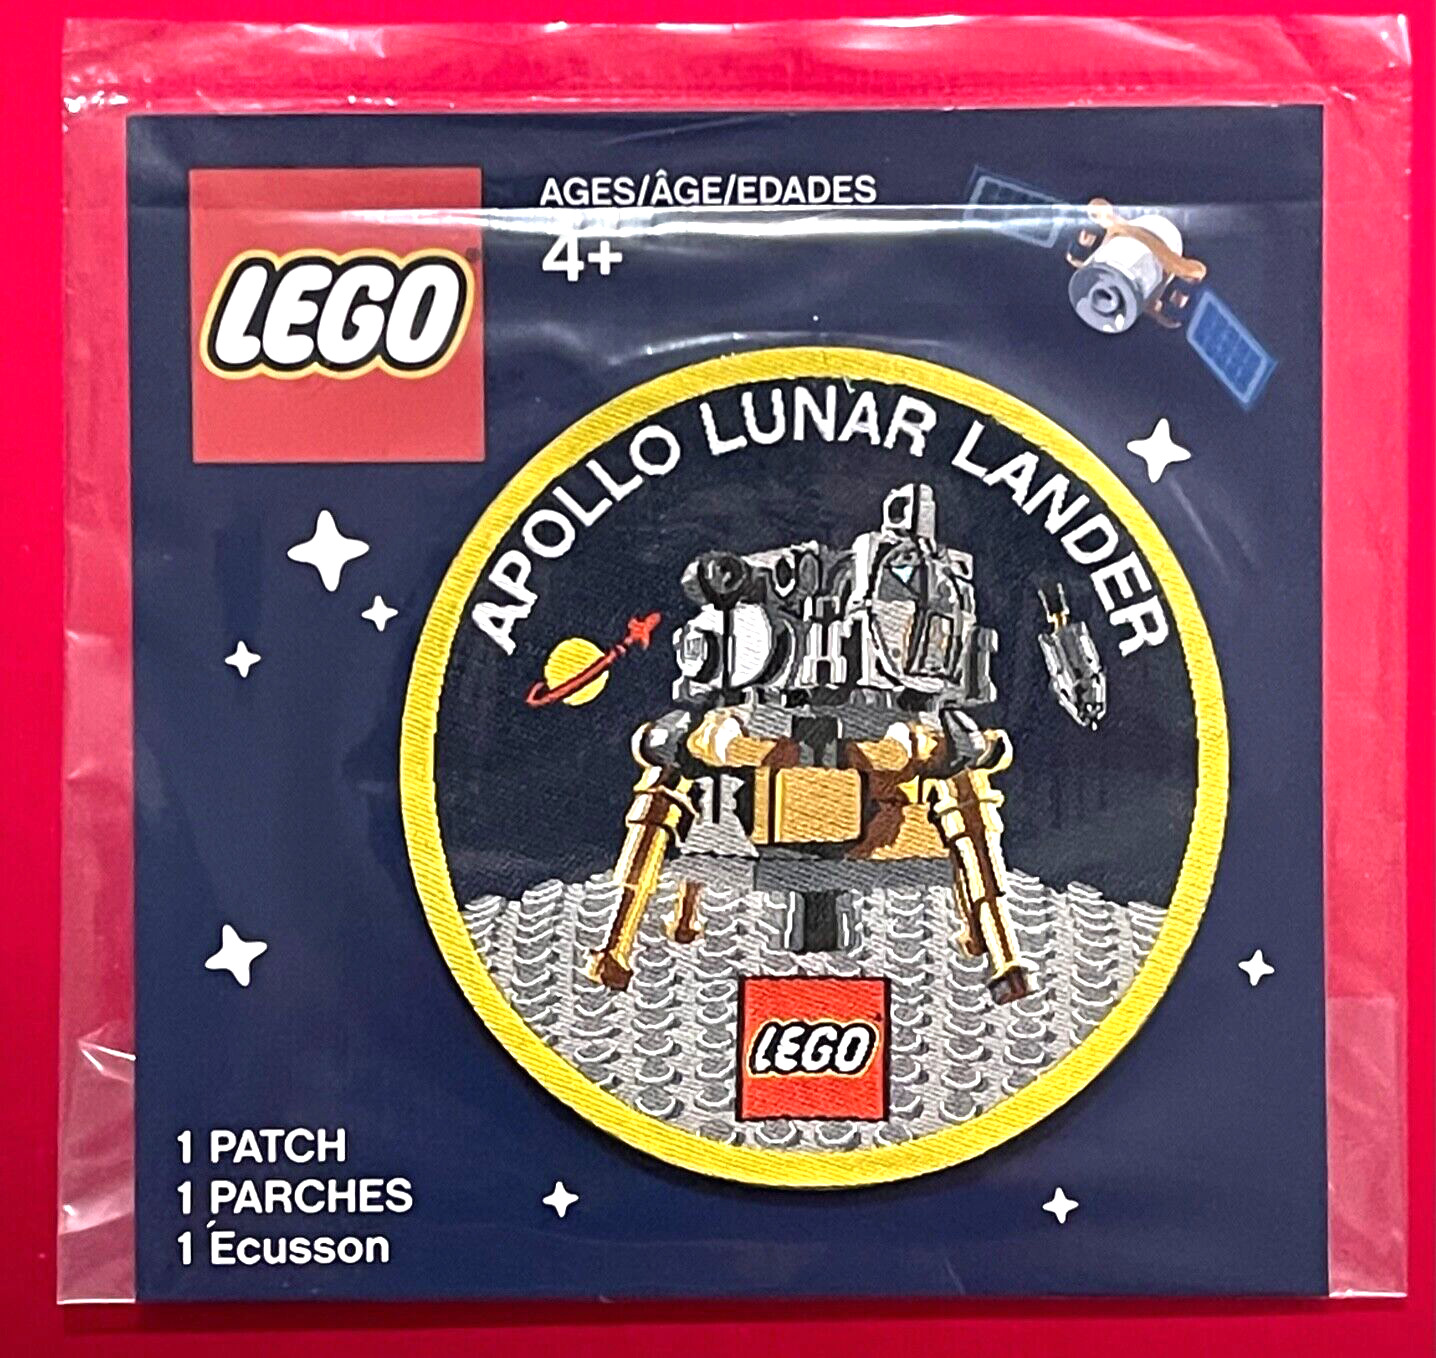 APOLLO LUNAR LANDER / LEGO SEALED TIE-IN MINI 3 INCH PROMOTION PATCH SEALED